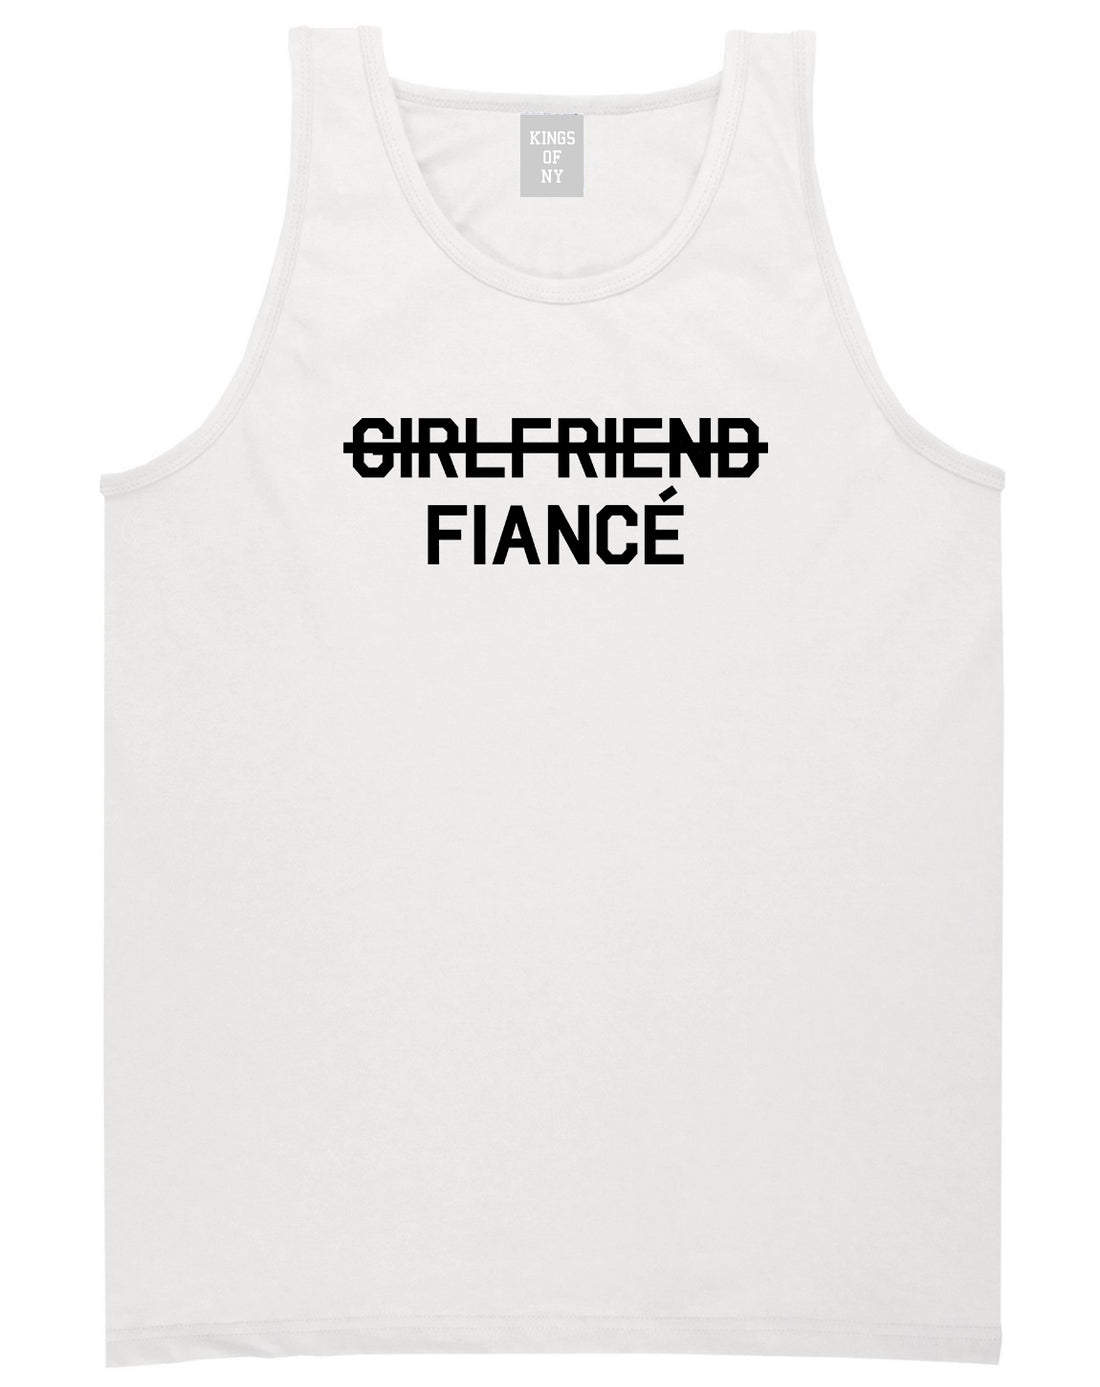 Girlfriend Fiance Engagement Mens White Tank Top Shirt by KINGS OF NY